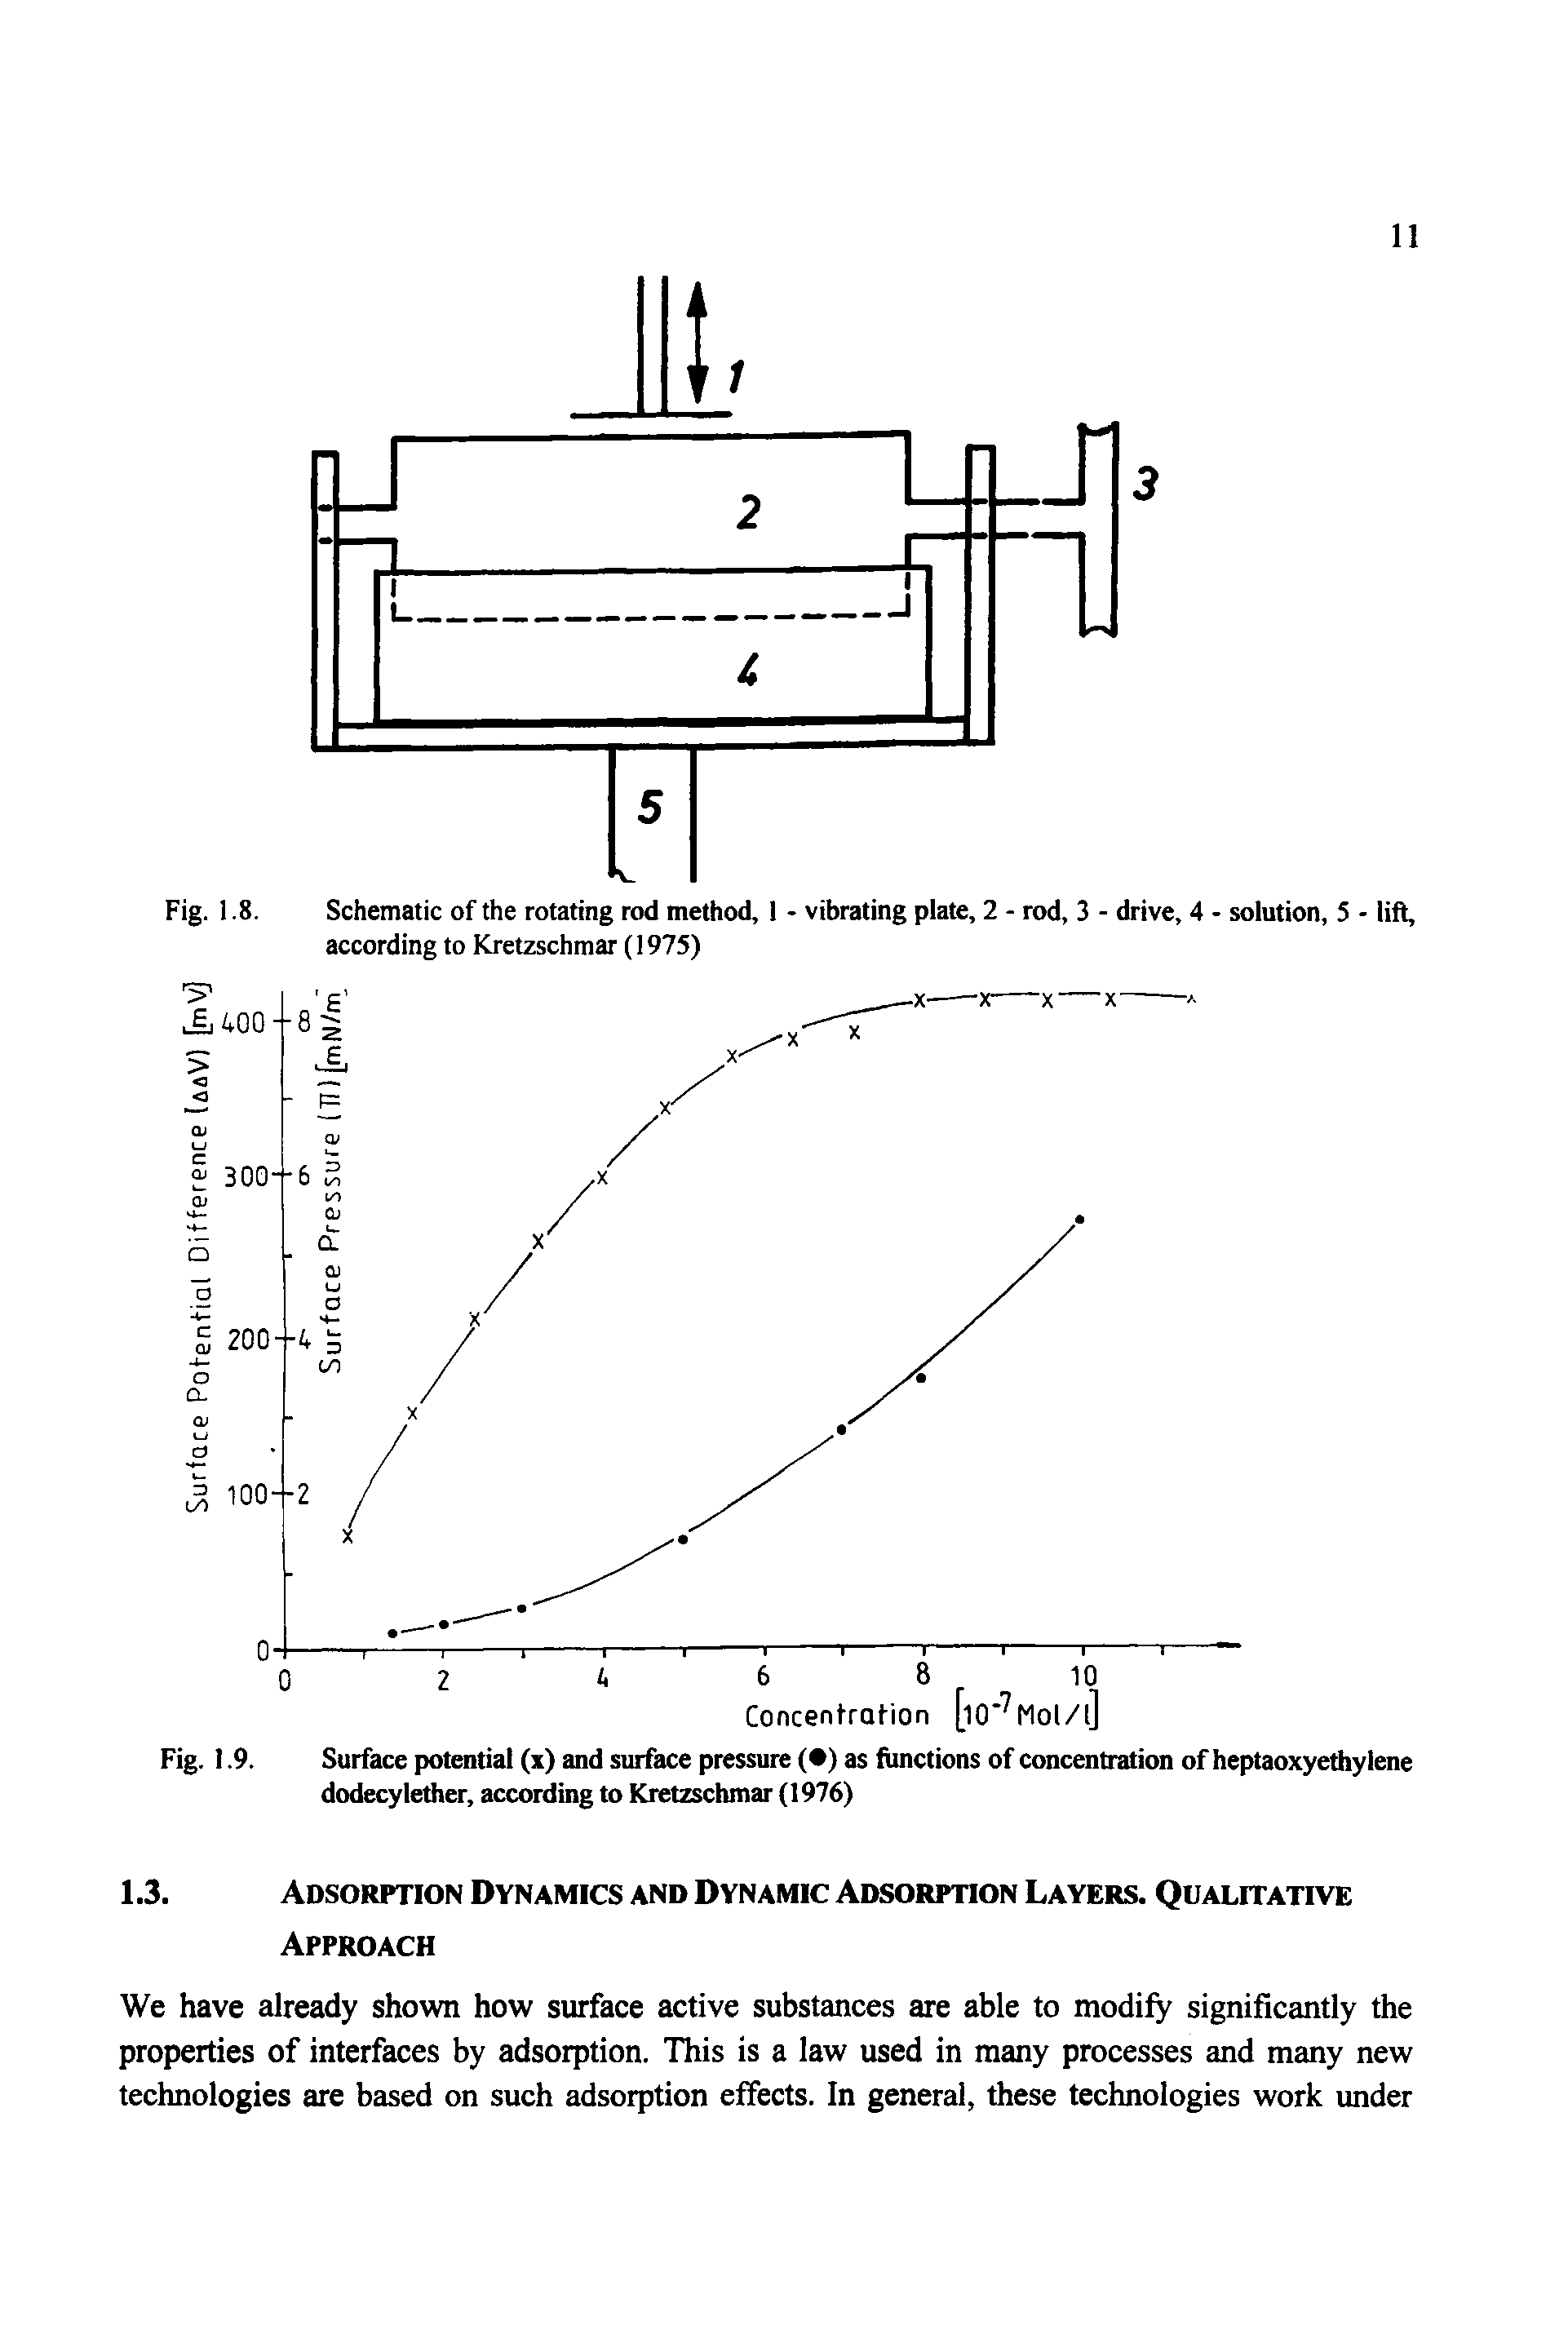 Schematic of the rotating rod method, 1 - vibrating plate, 2 - rod, 3 - drive, 4 - solution, 5 - lift, according to Kretzschmar (1975)...